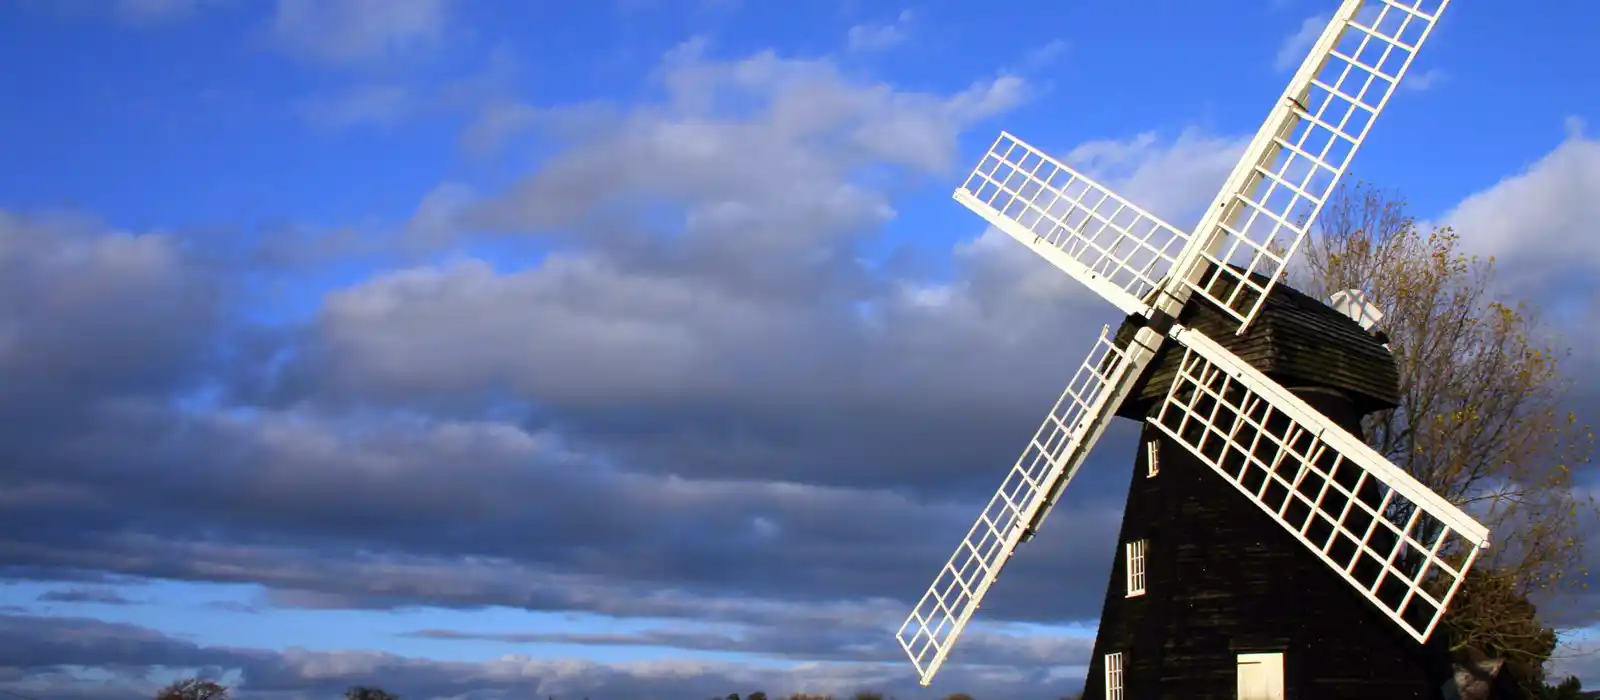 Lacey Green Windmill Buckinghamshire, England, photographed with large dramatic sky